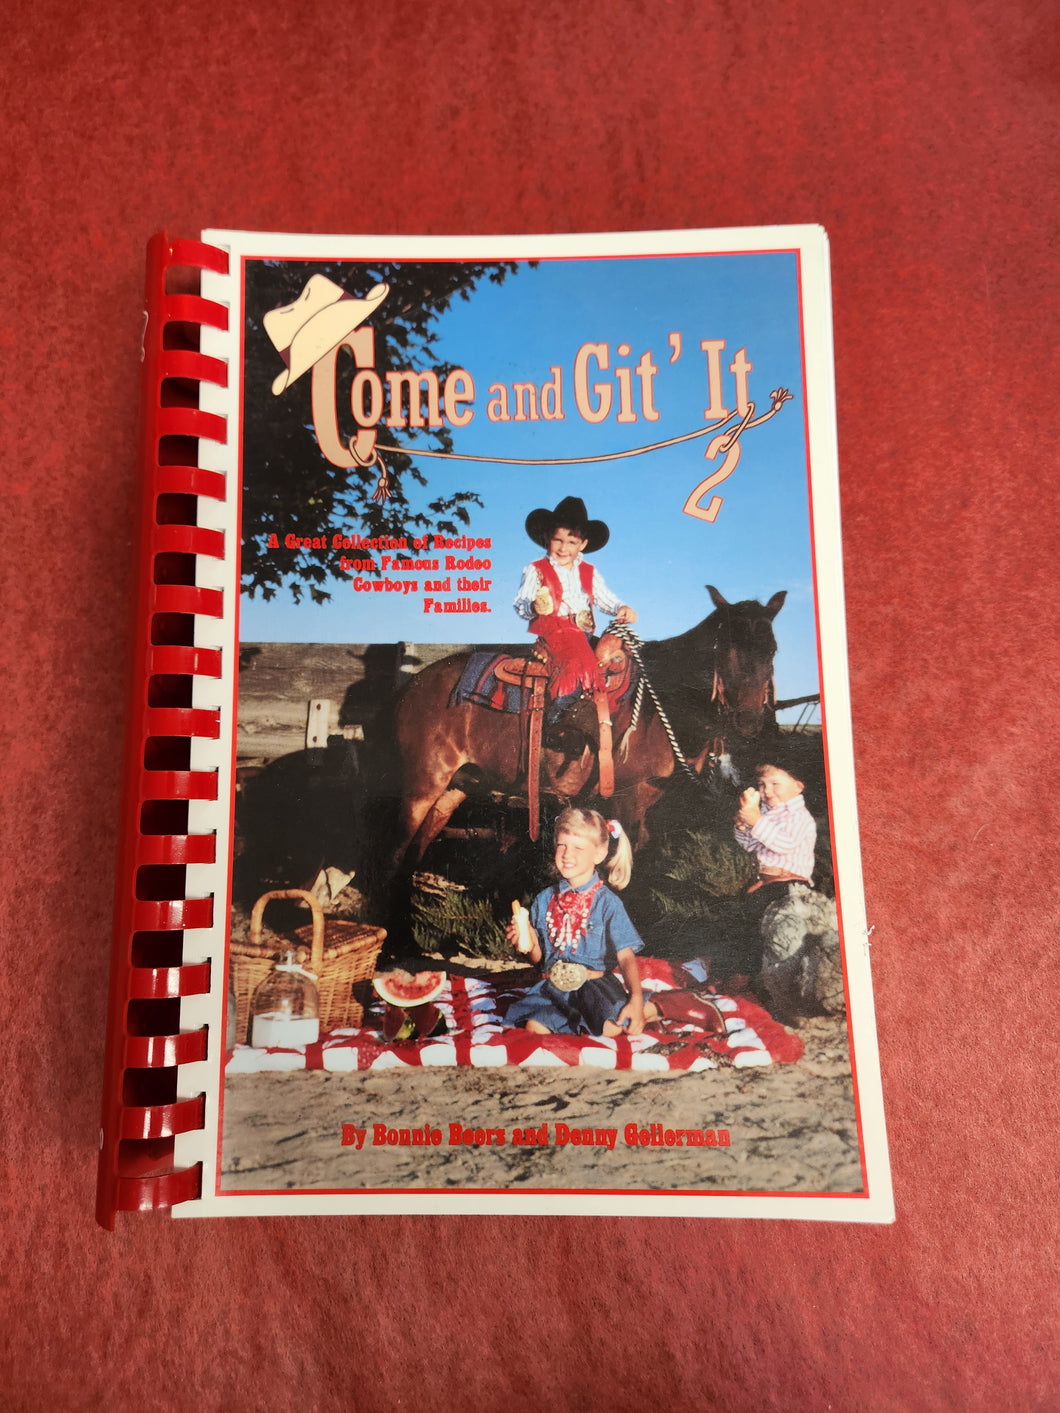 Come and Git' It 2, a collection by Bonnie Beers and Denny Gellerman